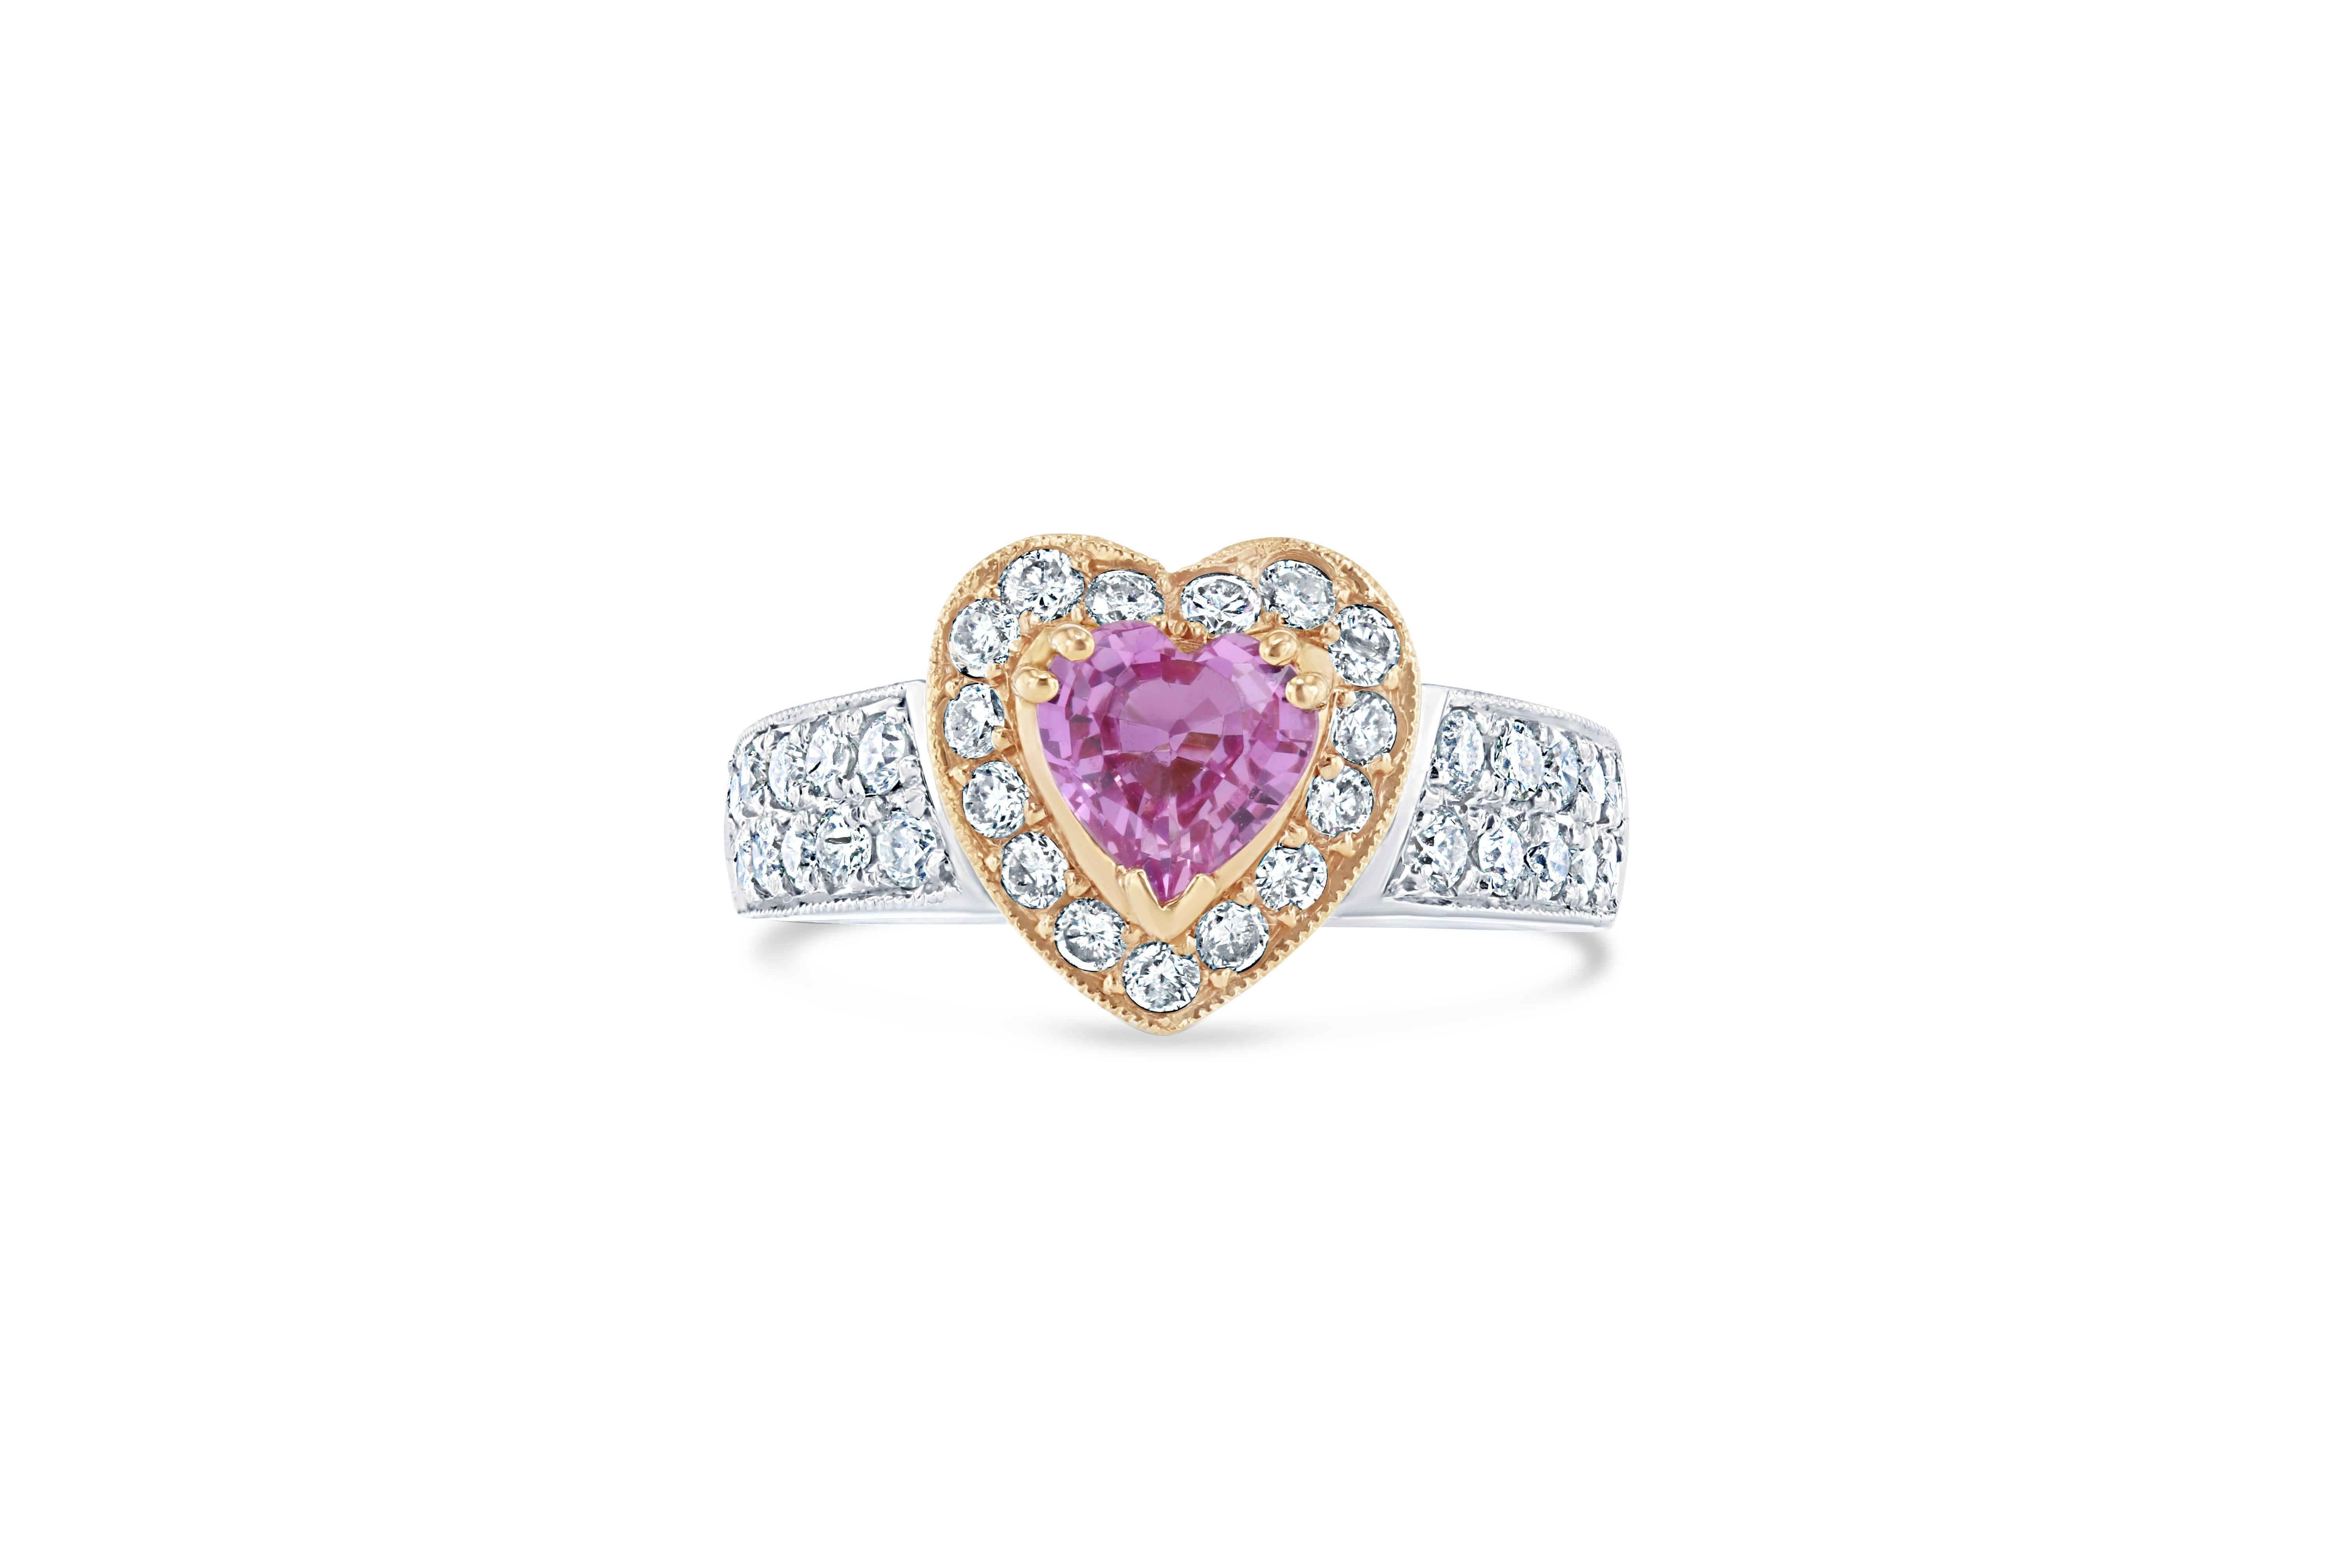 Gorgeous Heart Cut Pink Sapphire and Diamond Engagement Ring.  This ring has a 0.81 carat Heart Cut Pink Sapphire in the center of the ring and is surrounded by 35 Round Brilliant Cut Diamonds that weigh 0.71 carat. This two-tone ring is casted in